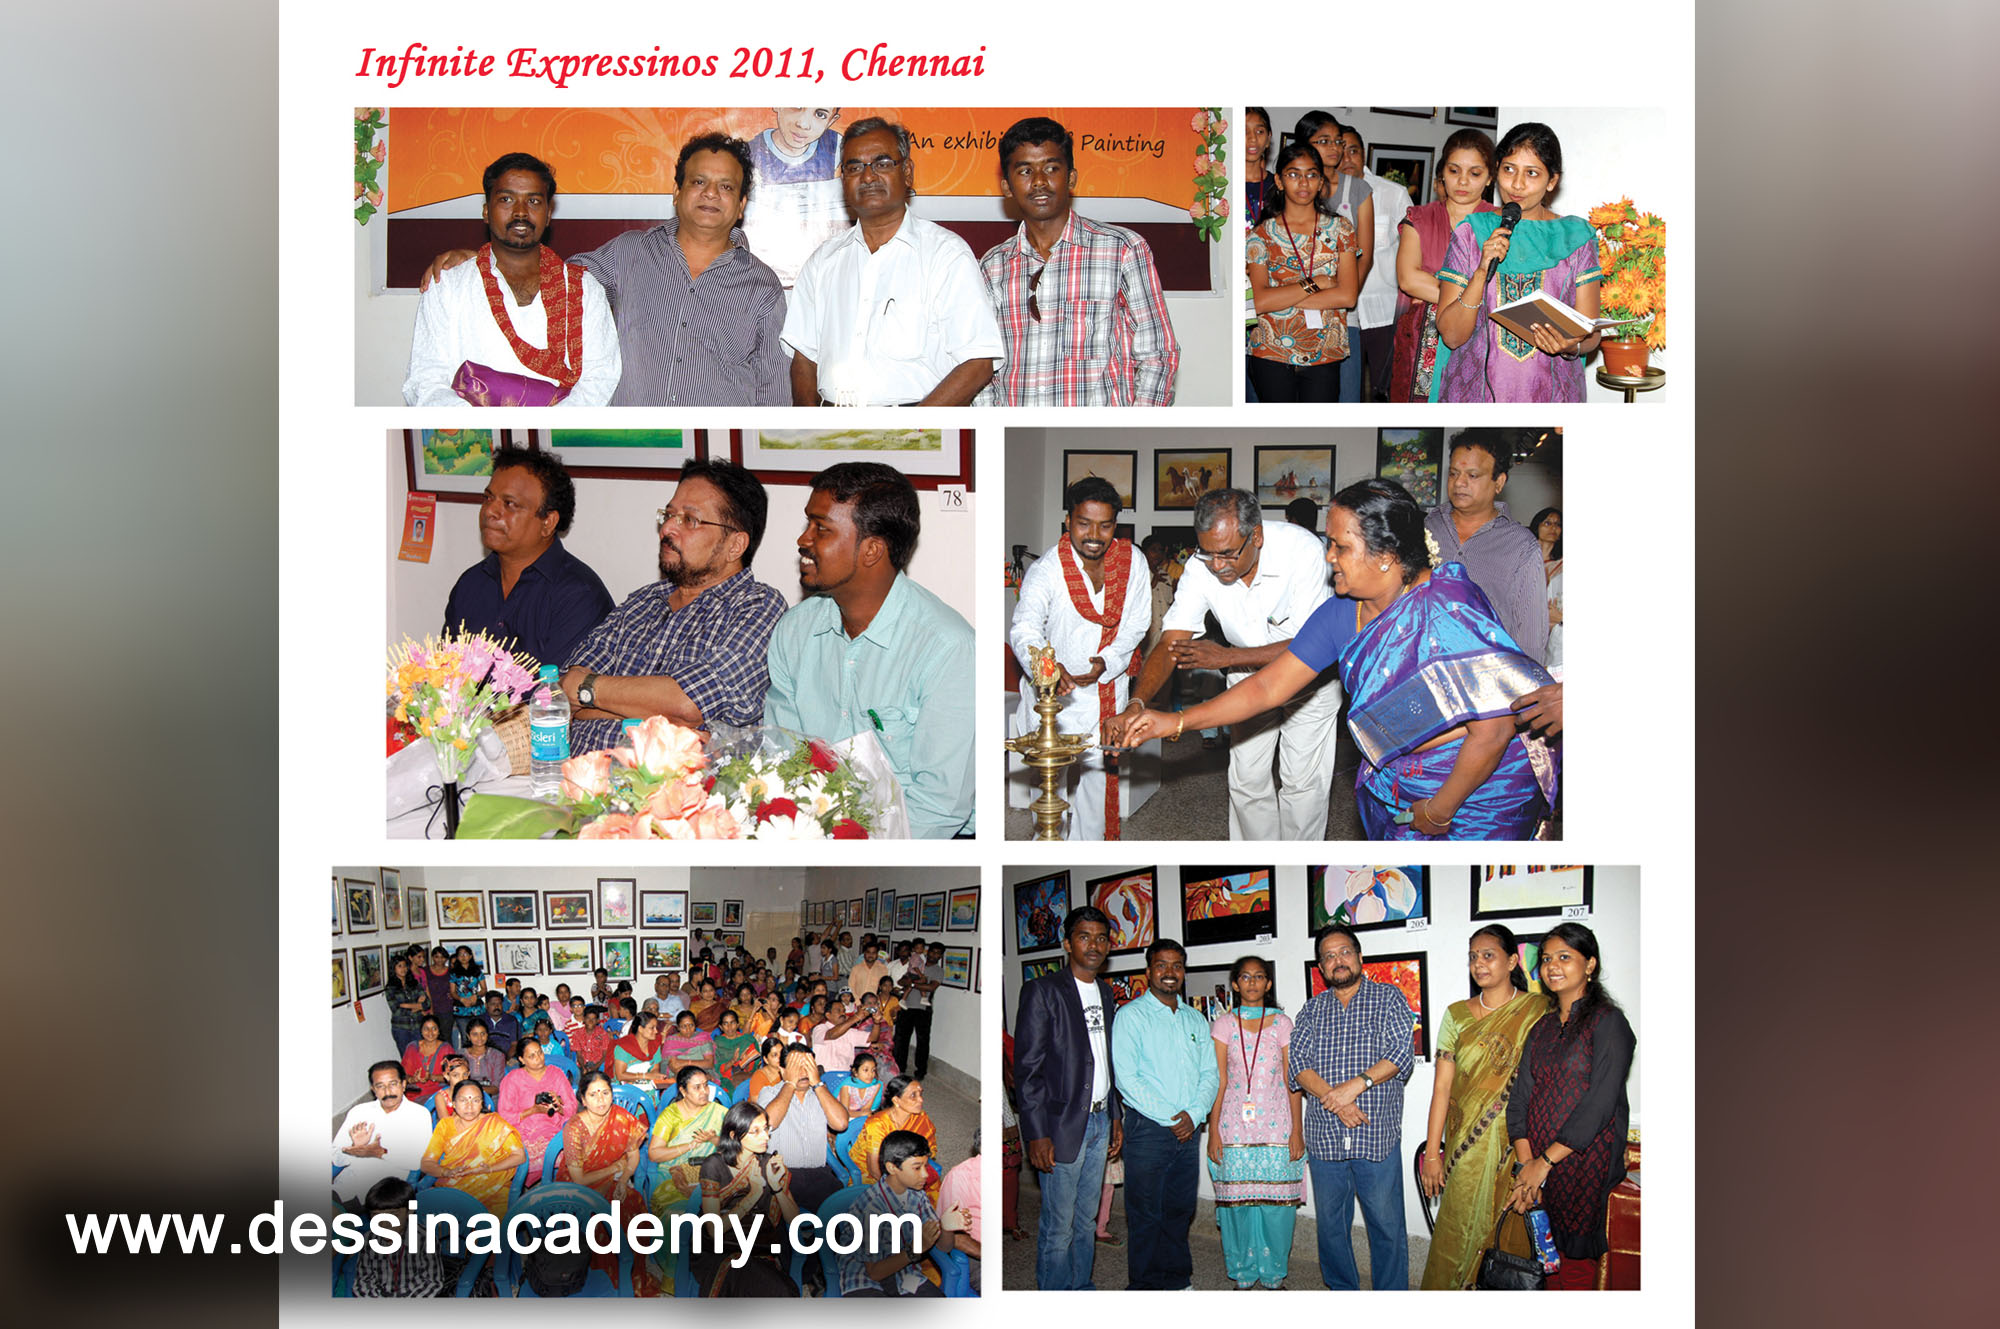 Dessin School of arts Event Gallery 5, Painting classes in Anna Nagar Shanthi ColonyDessin School of Arts